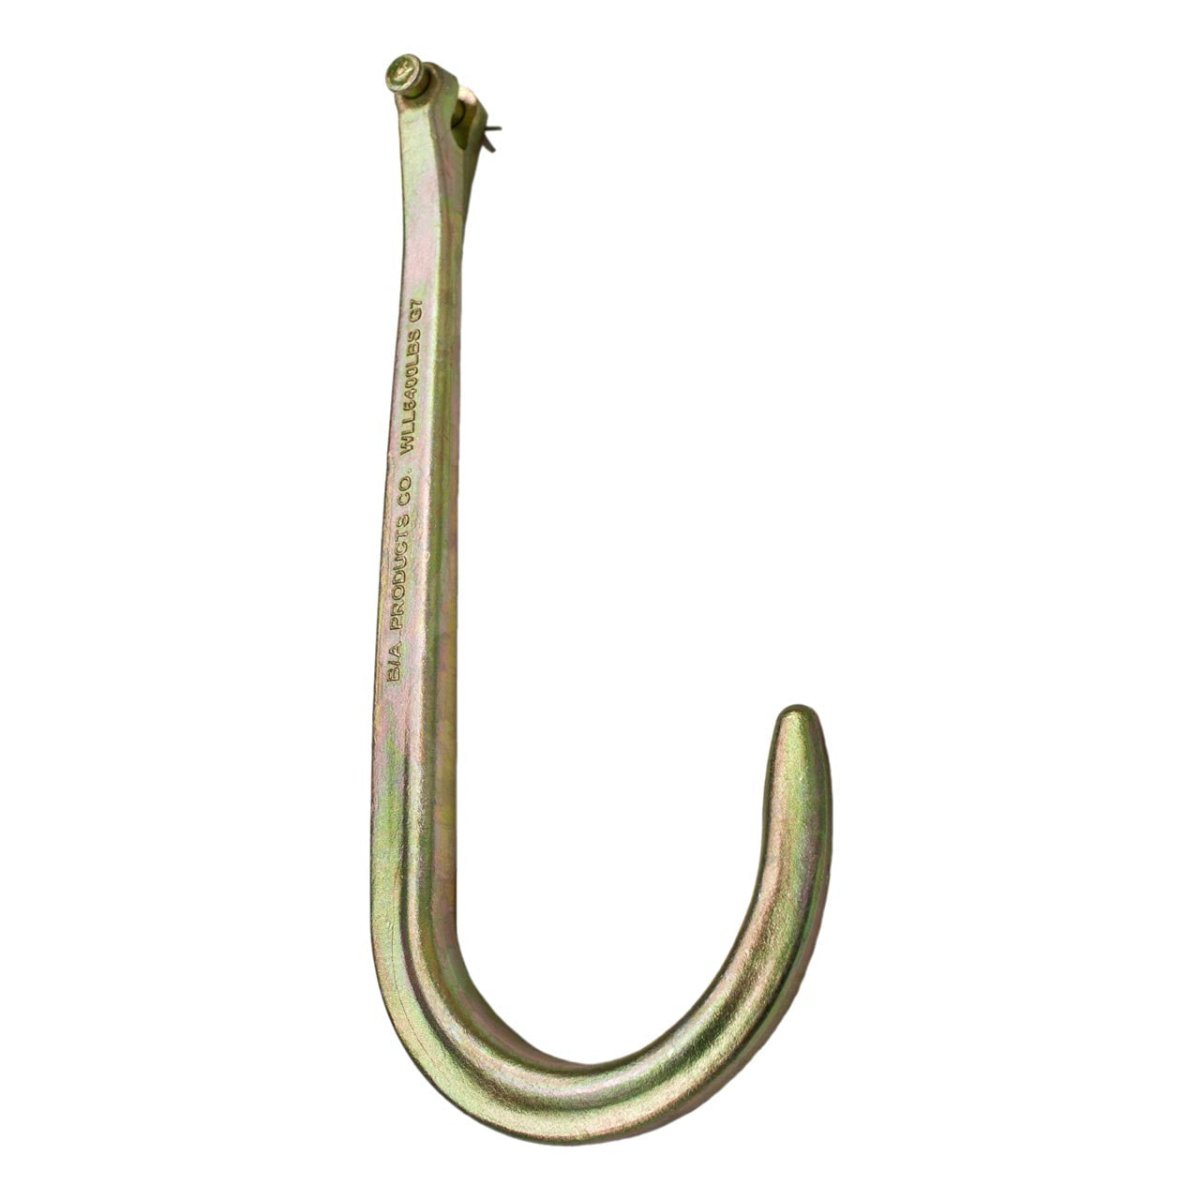 B/A Products Co. 15" Forged Clevis J Hook - N711-2CL - starequipmentsales